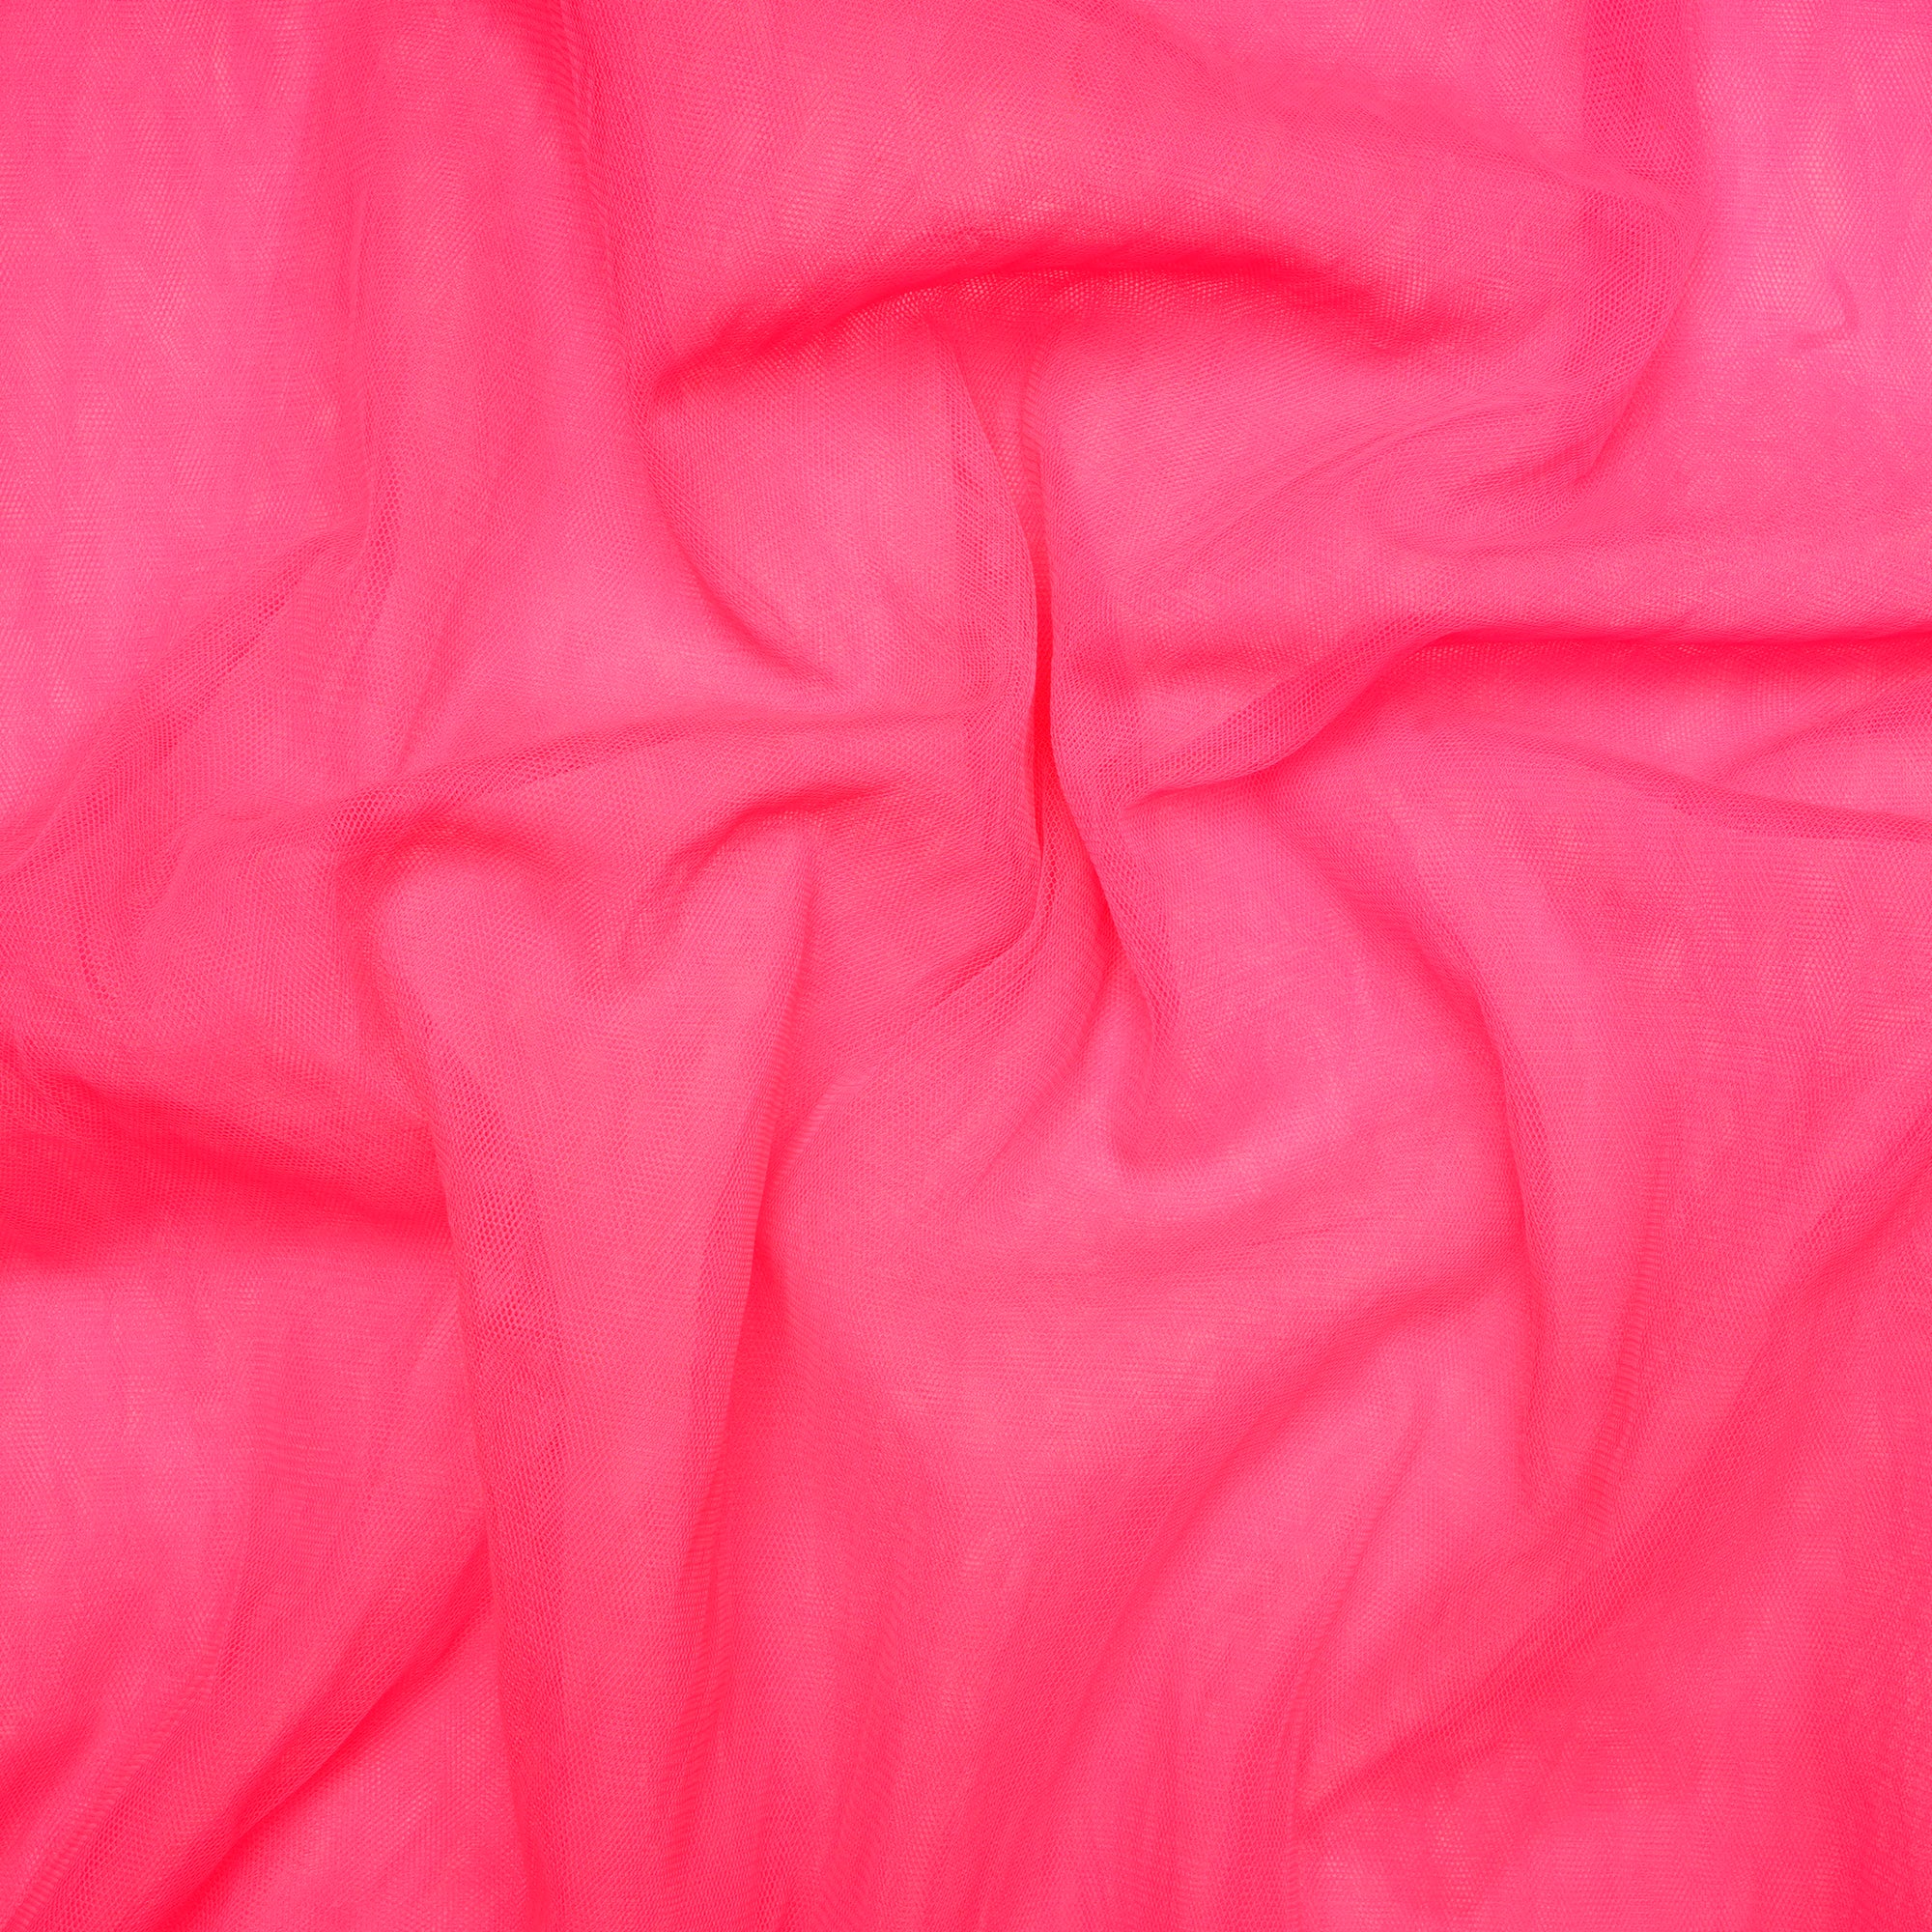 Fluorescent Pink Color Nylon Butterfly Net Fabric